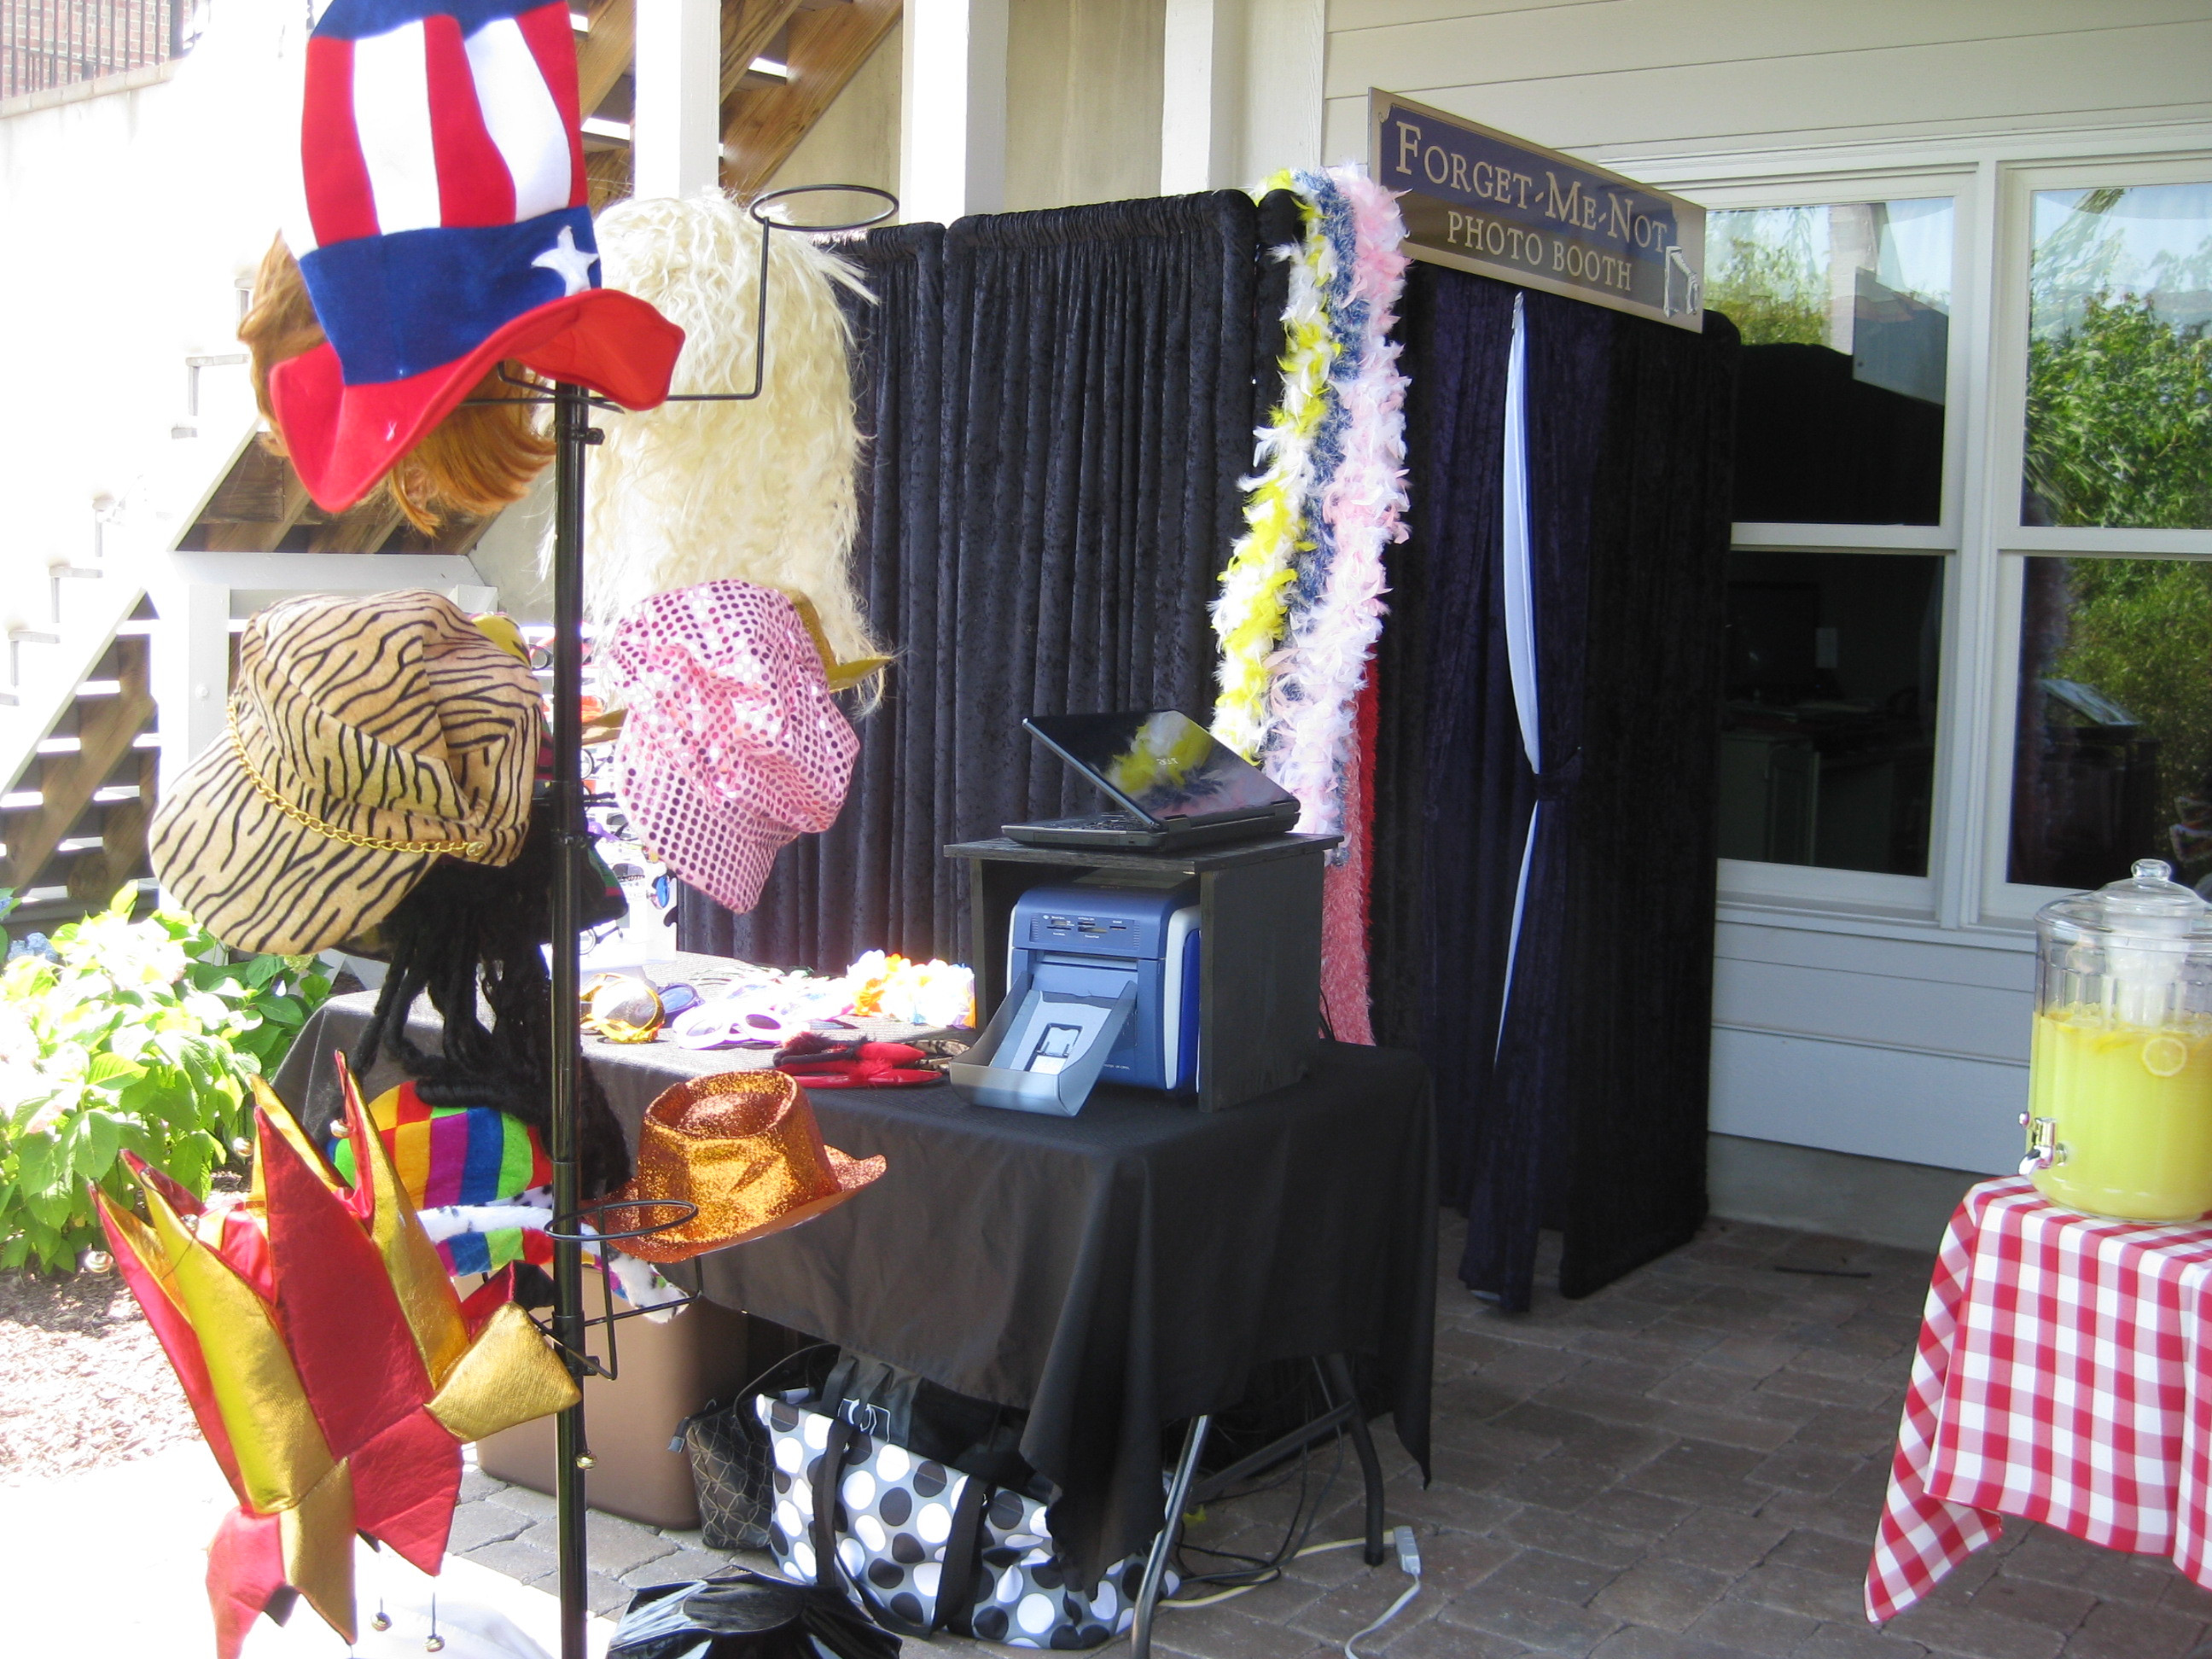 Photo Booth Ideas For Graduation Party
 1000 images about Graduation on Pinterest